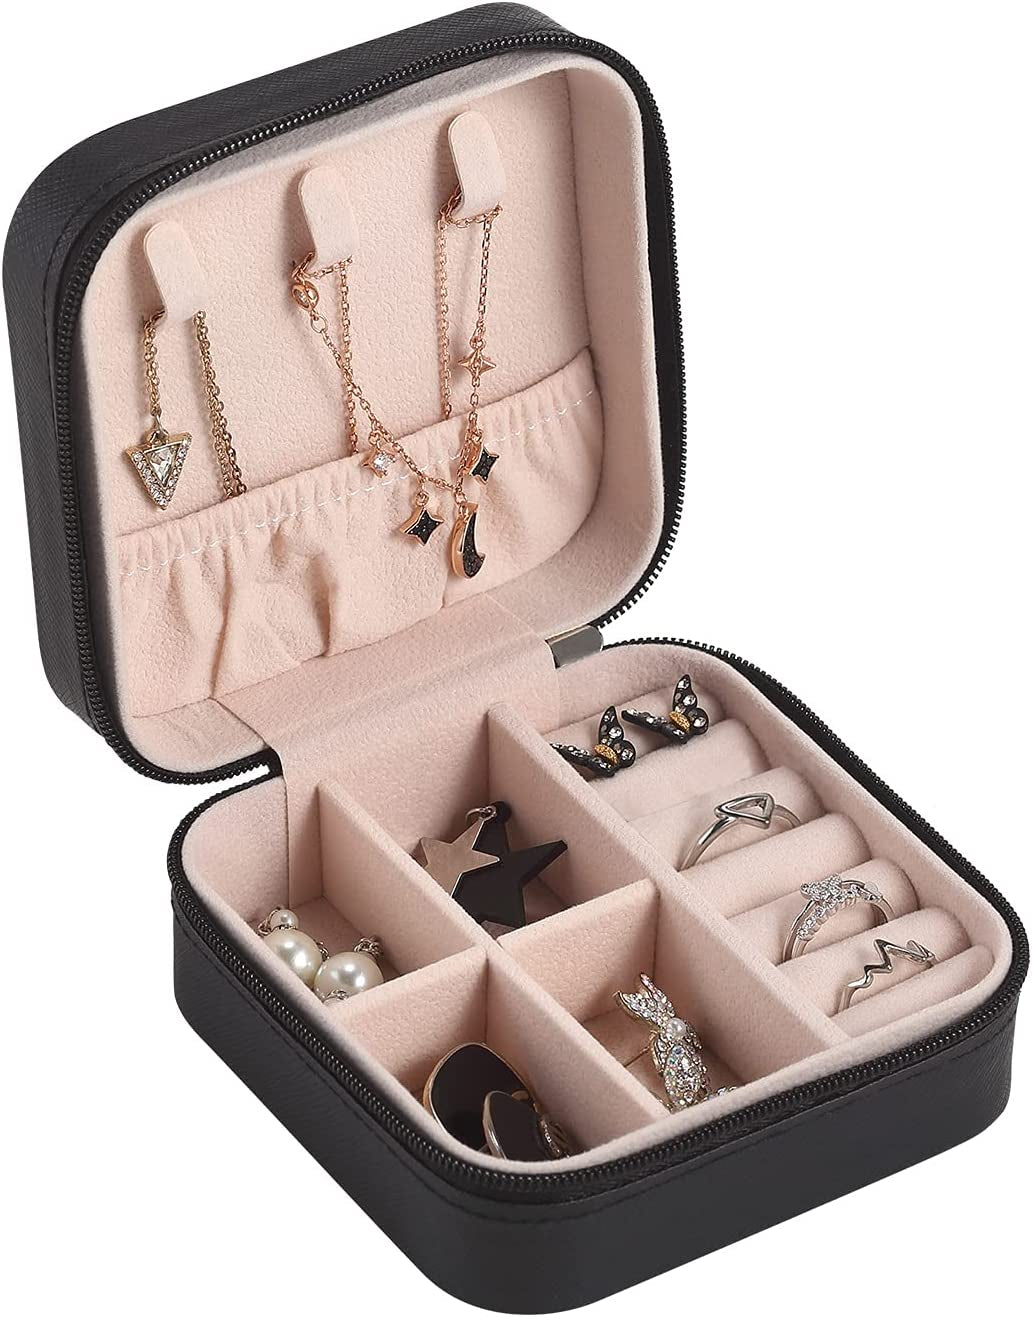 Travel Jewelry Case, Small Jewelry Box Portable Jewelry Travel Organizer Display Storage Case for Rings Earring Necklace Bracelet, Gift for Women Girls, Black